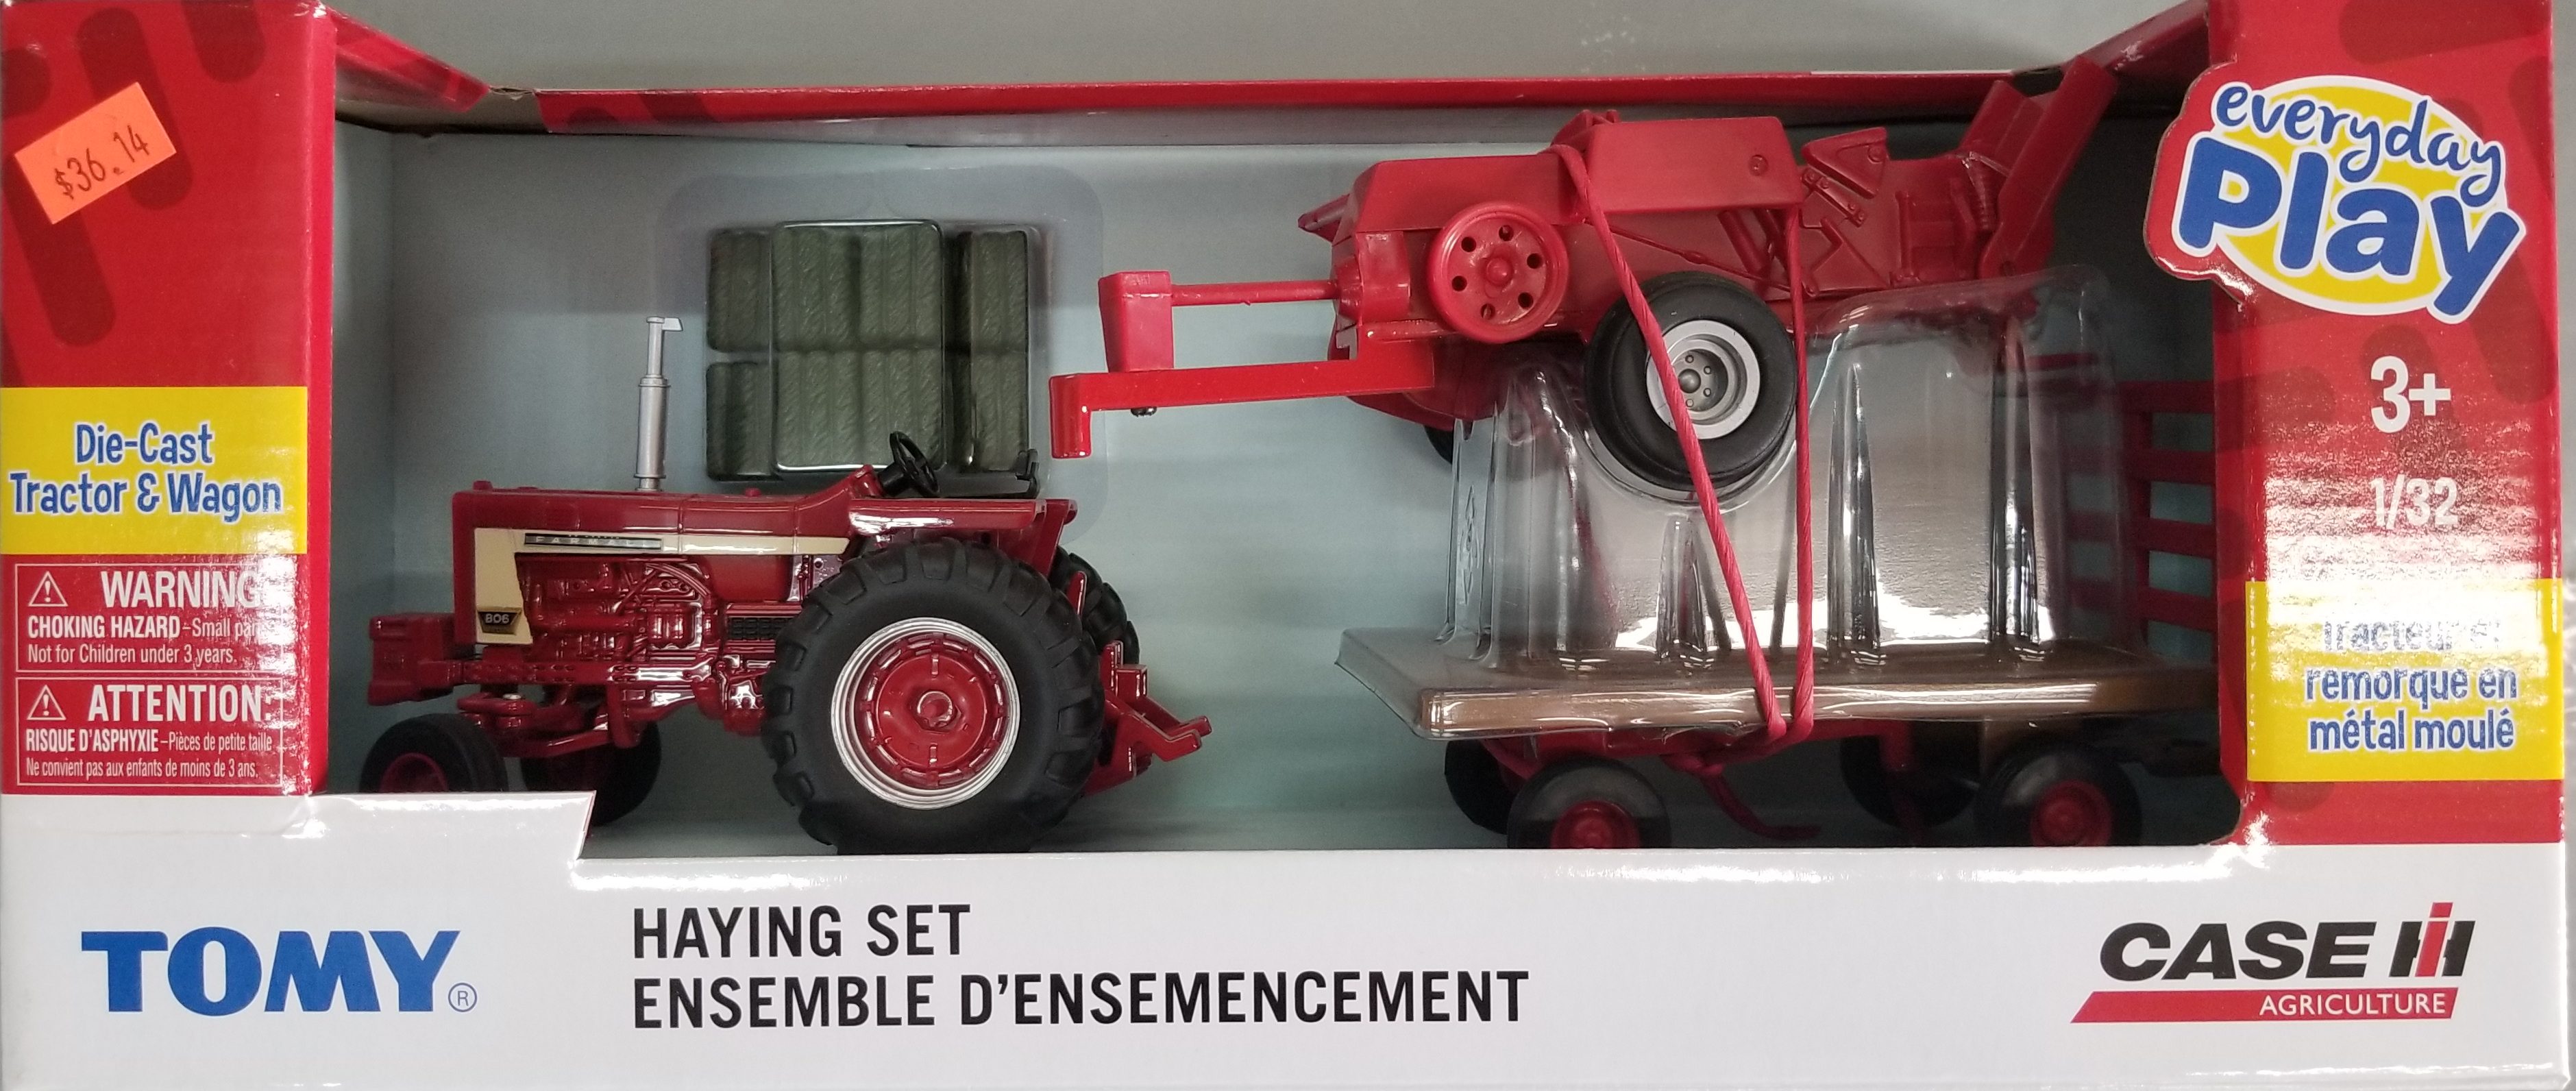 1/32 DIE CAST TRACTOR AND WAGON
EVERYDAY PLAY
TOMY